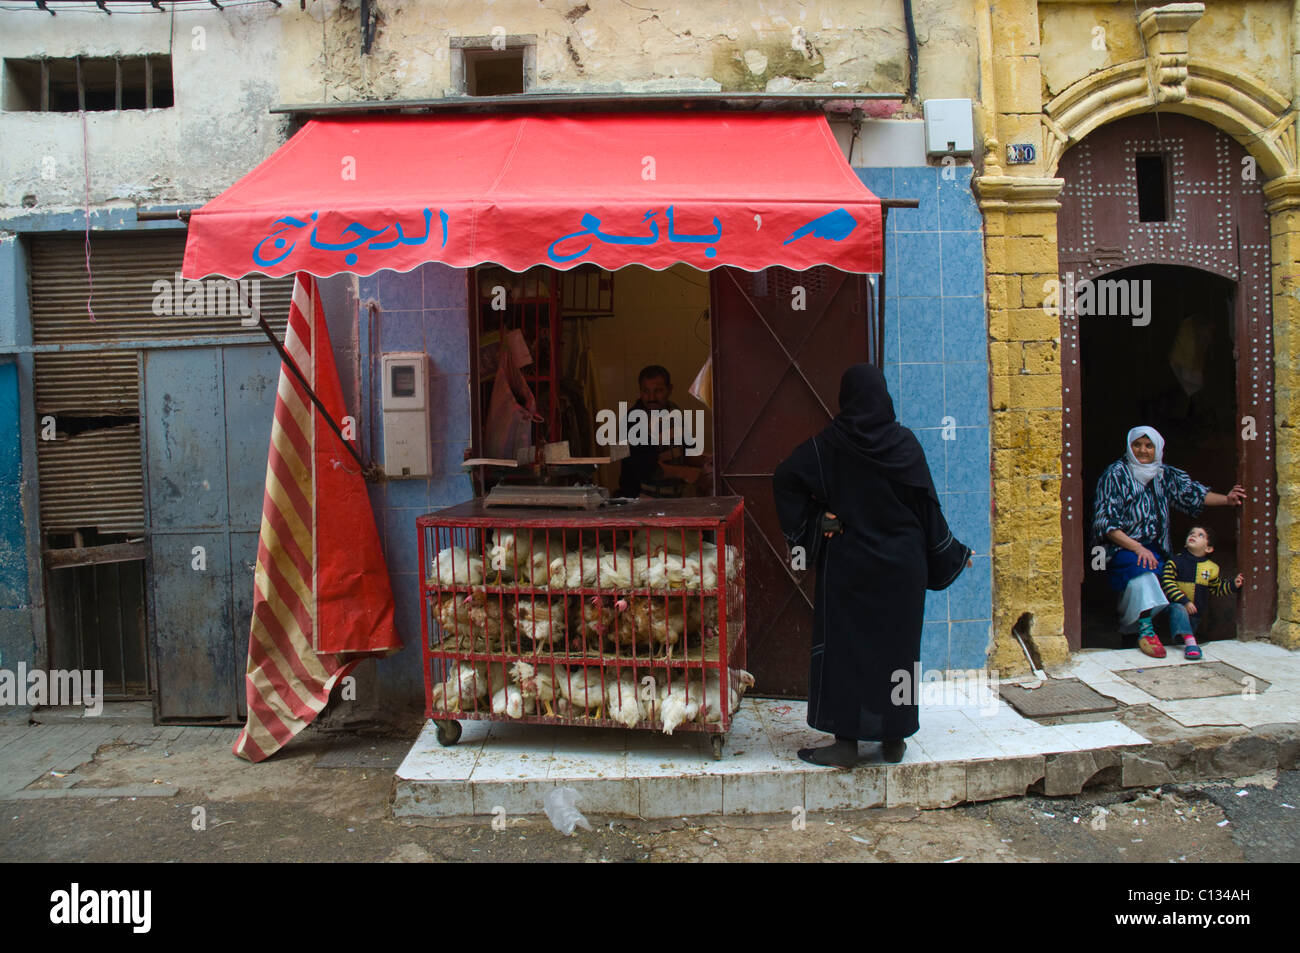 Chicken stall at a street market in Medina old quarters Casablanca central Morocco northern Africa Stock Photo